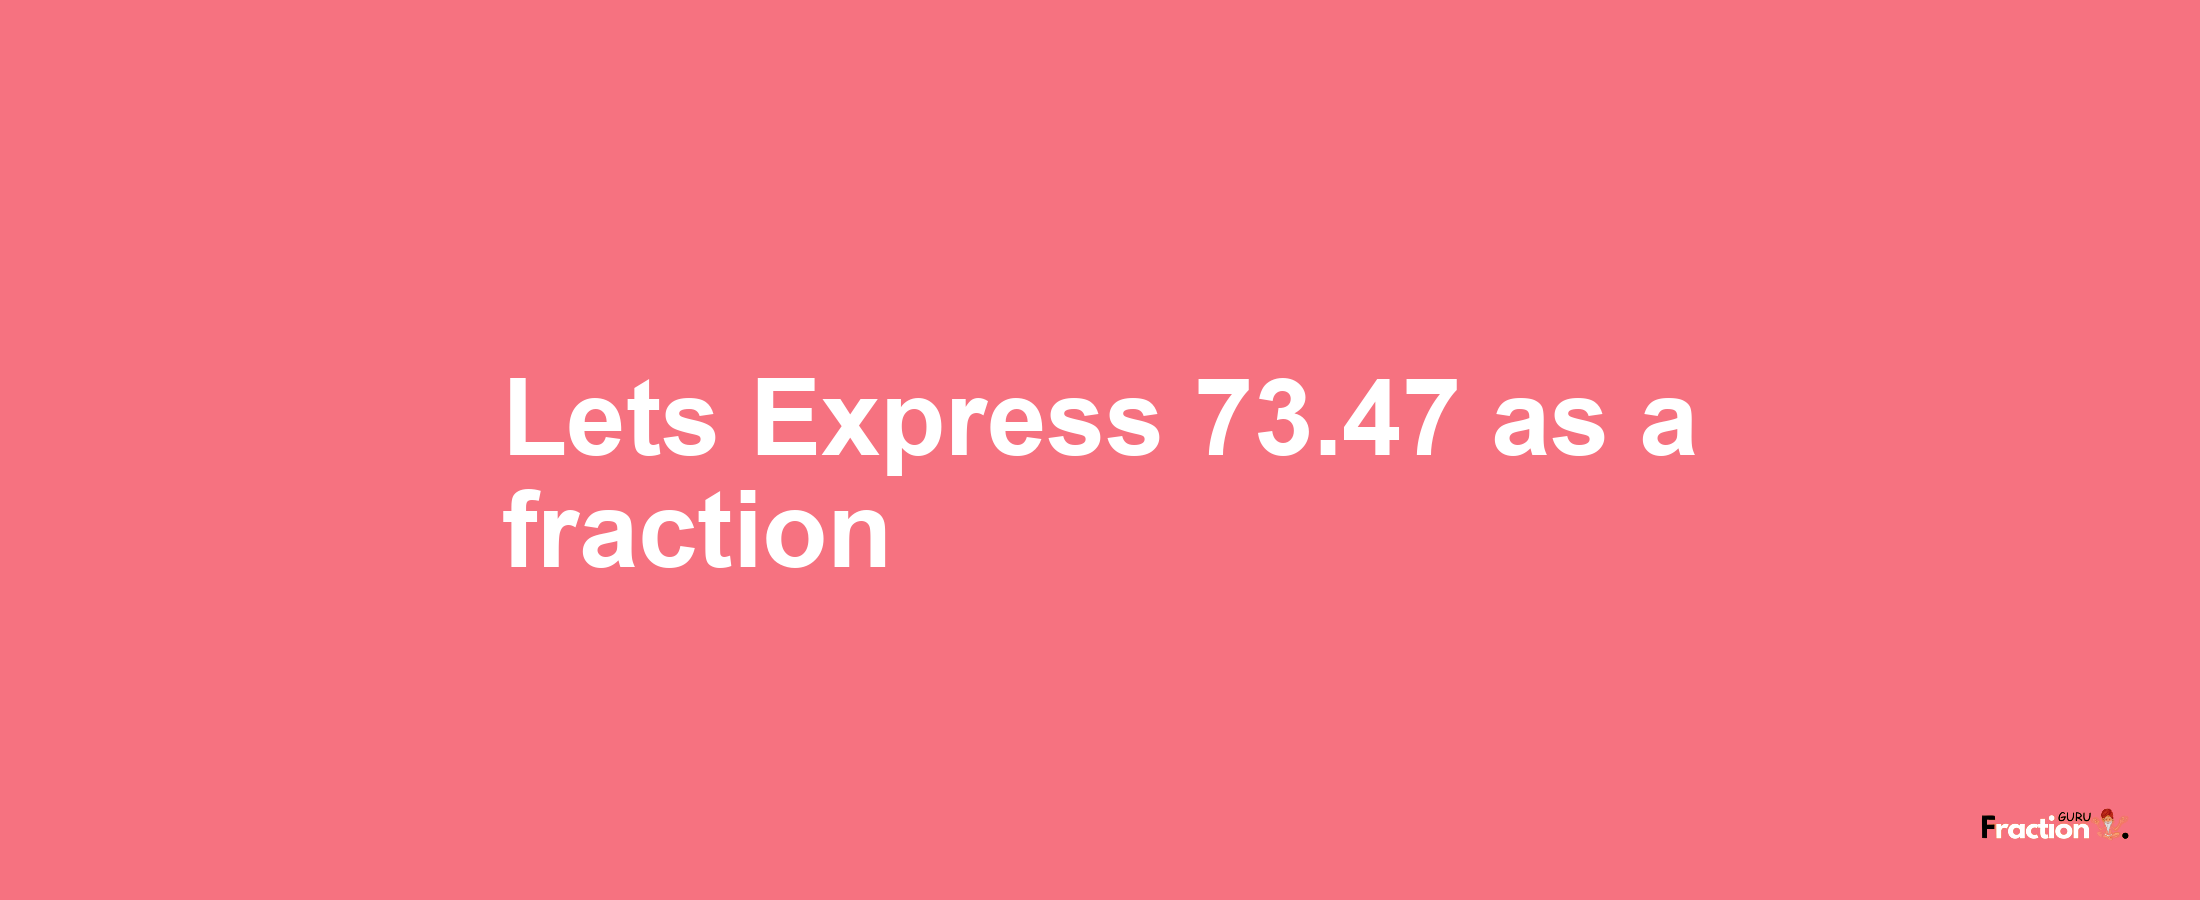 Lets Express 73.47 as afraction